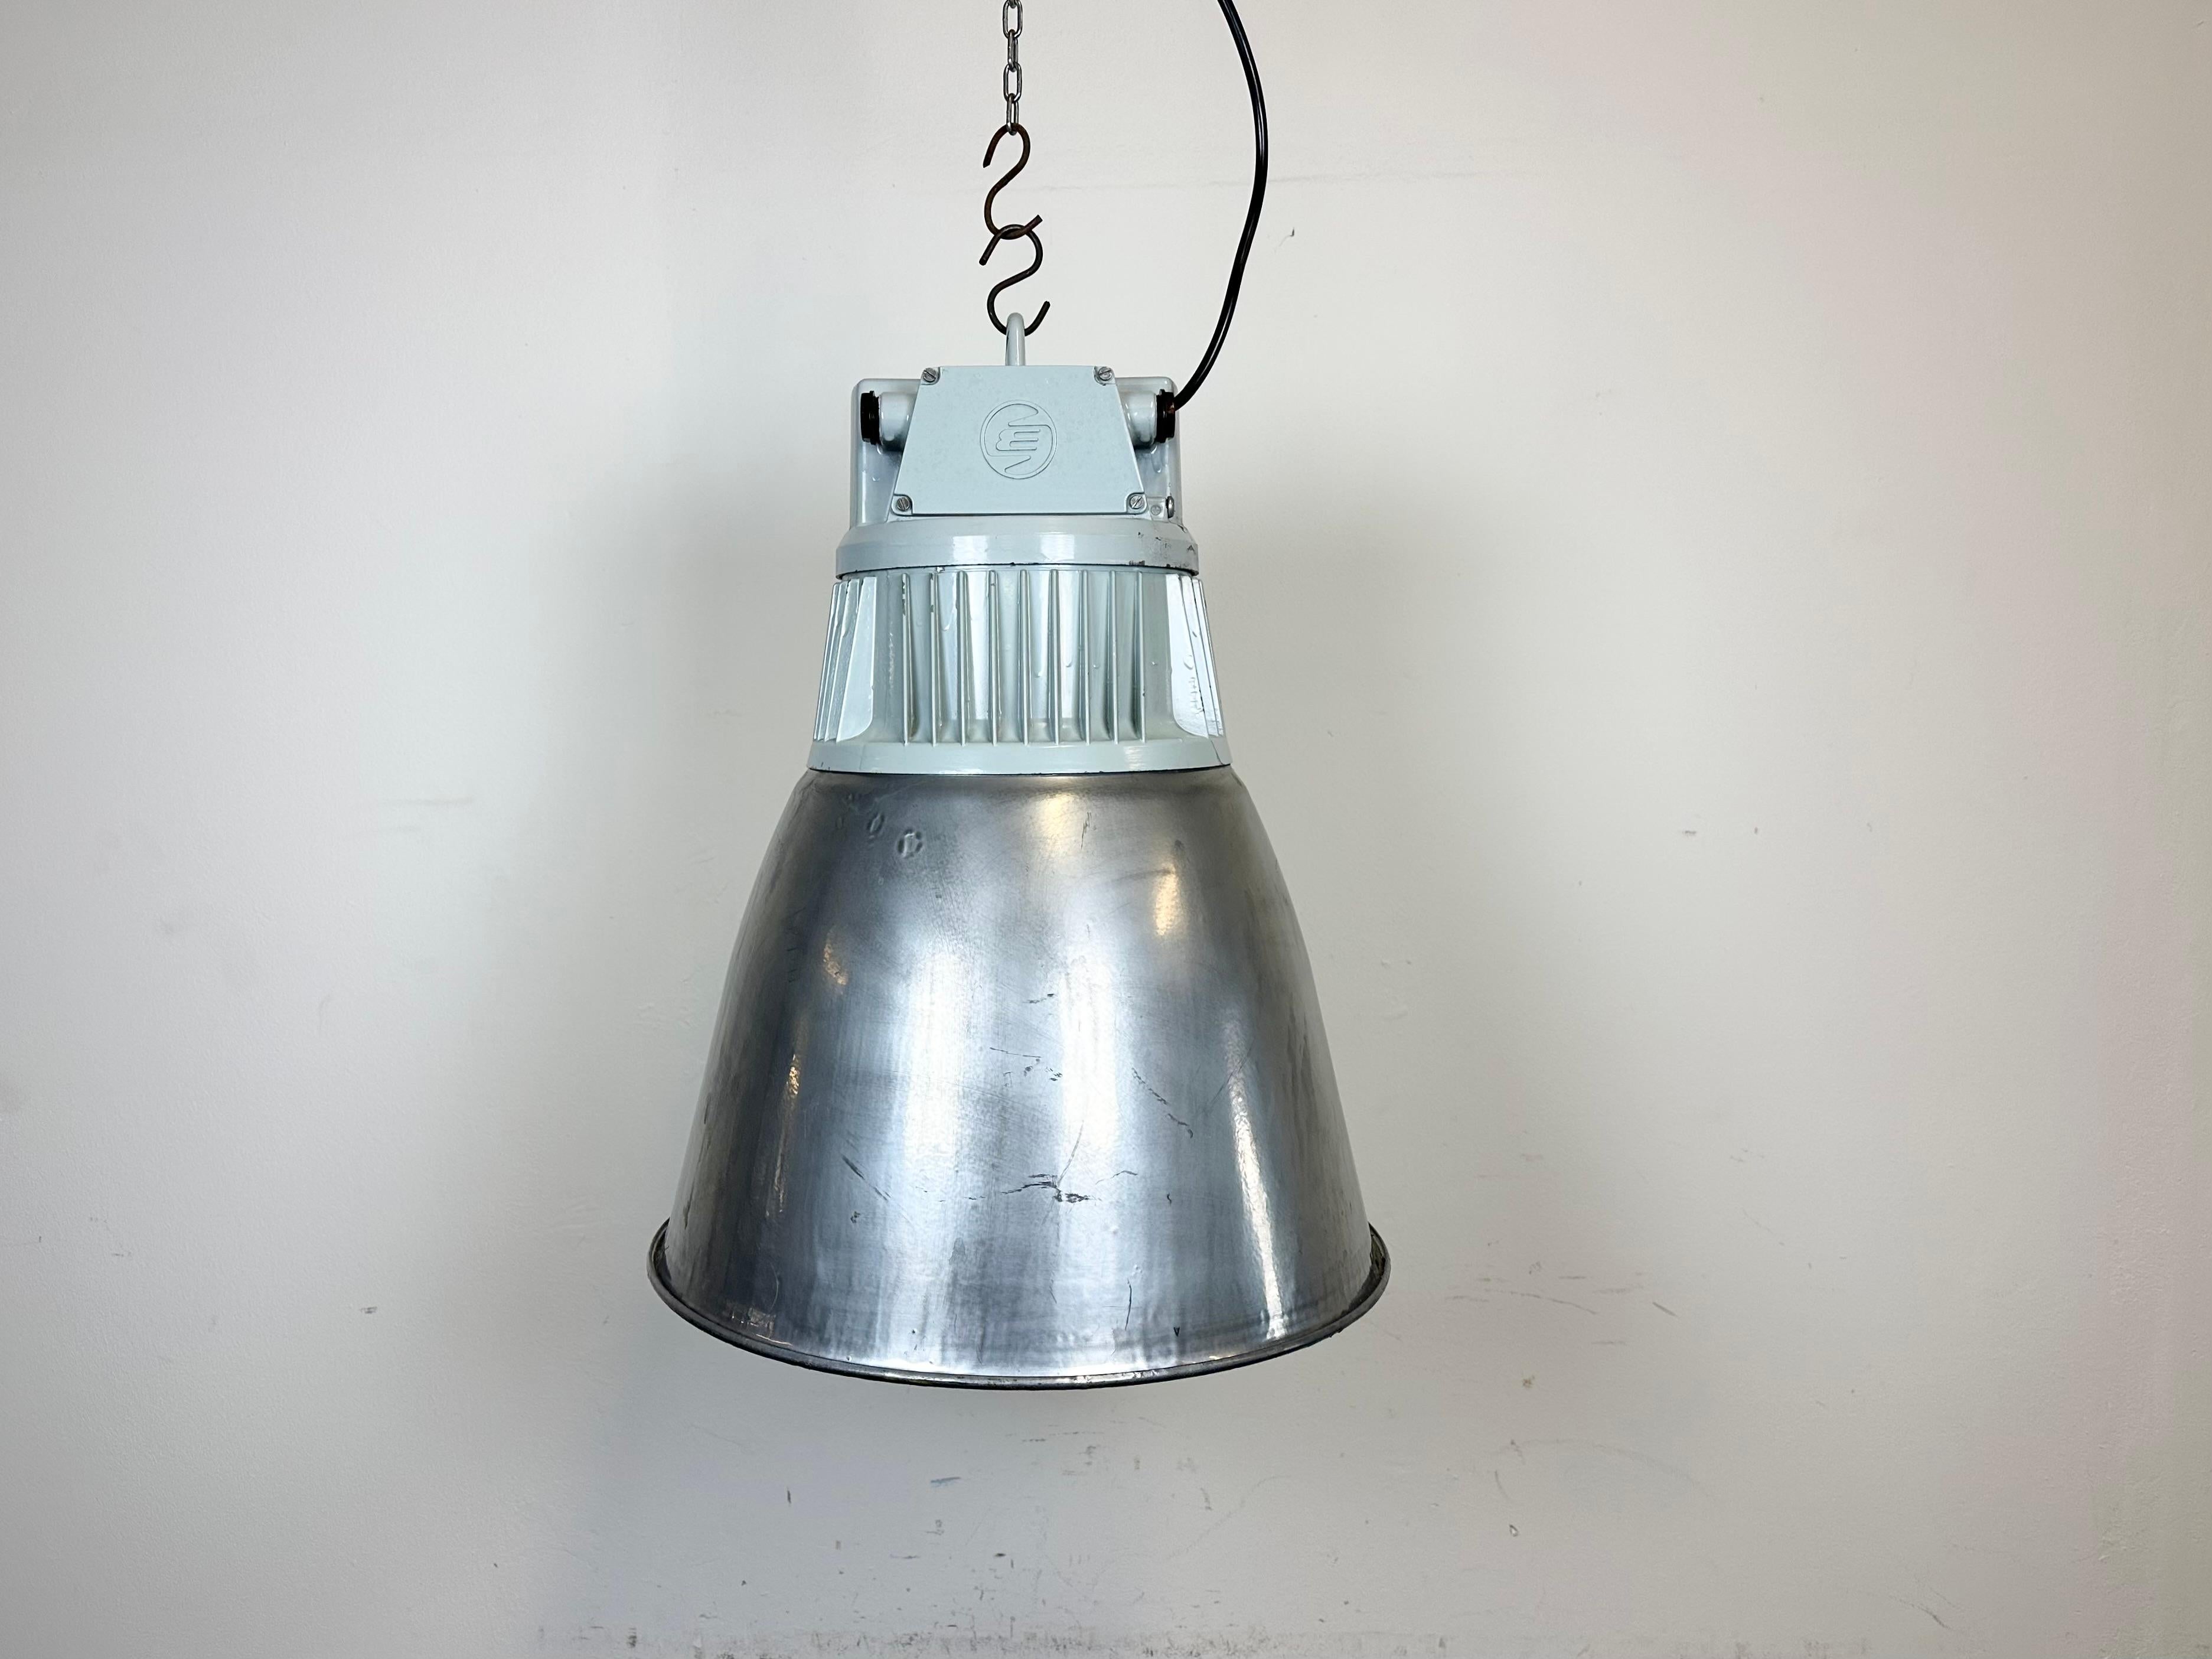 Industrial factory hall lamp
- Manufactured by Elektrosvit
- Produced in former Czechoslovakia during the 1970s
- Iron silver shade
- Grey cast aluminium top
- Weight: 5,8 kg
- Diameter : 43 cm
- New porcelain socket requires standard  E27 / E26